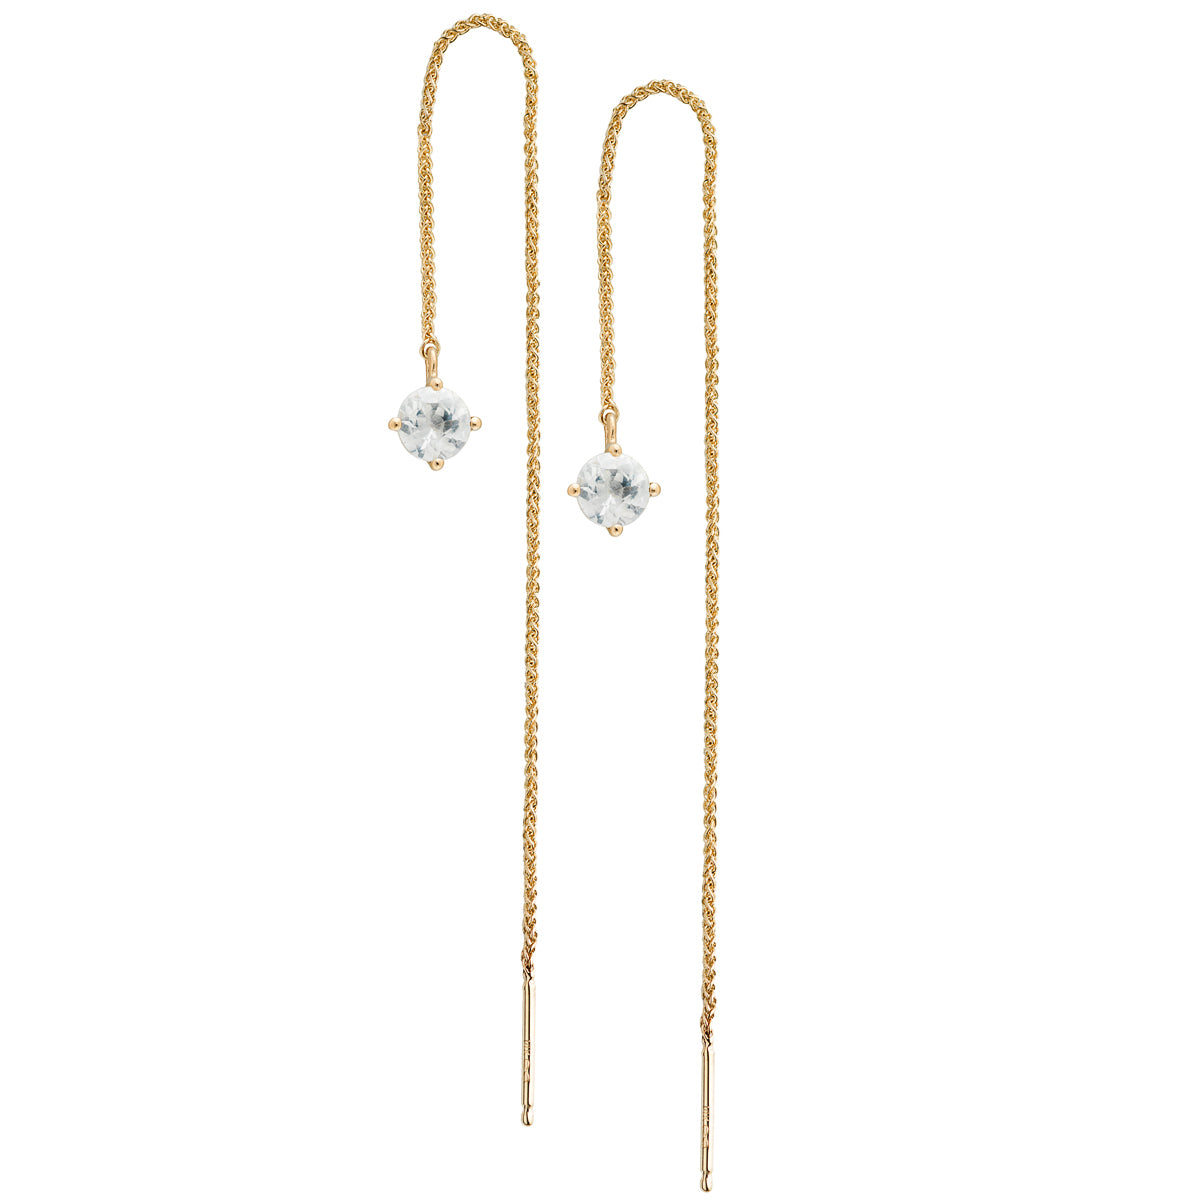 IRINI Gem Drop thread earring in 14k gold with a brilliant white sapphire gemstone, simple, delicate perfection